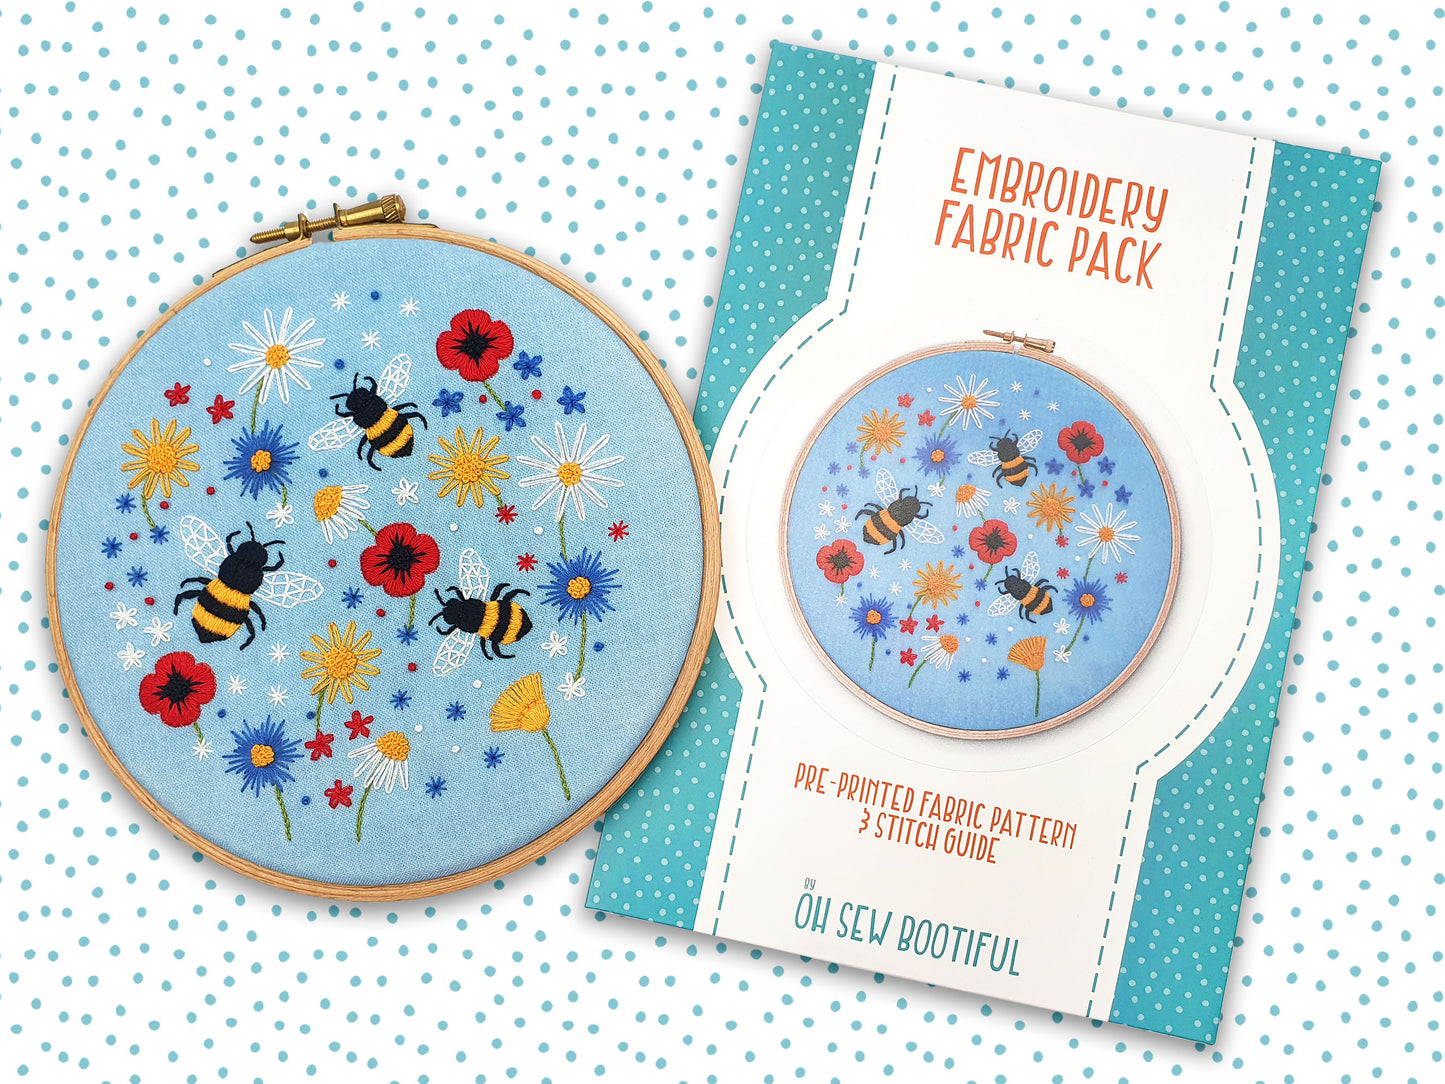 Bees and Wildflowers Embroidery Fabric Pattern Pack - Fabric Packs - ohsewbootiful